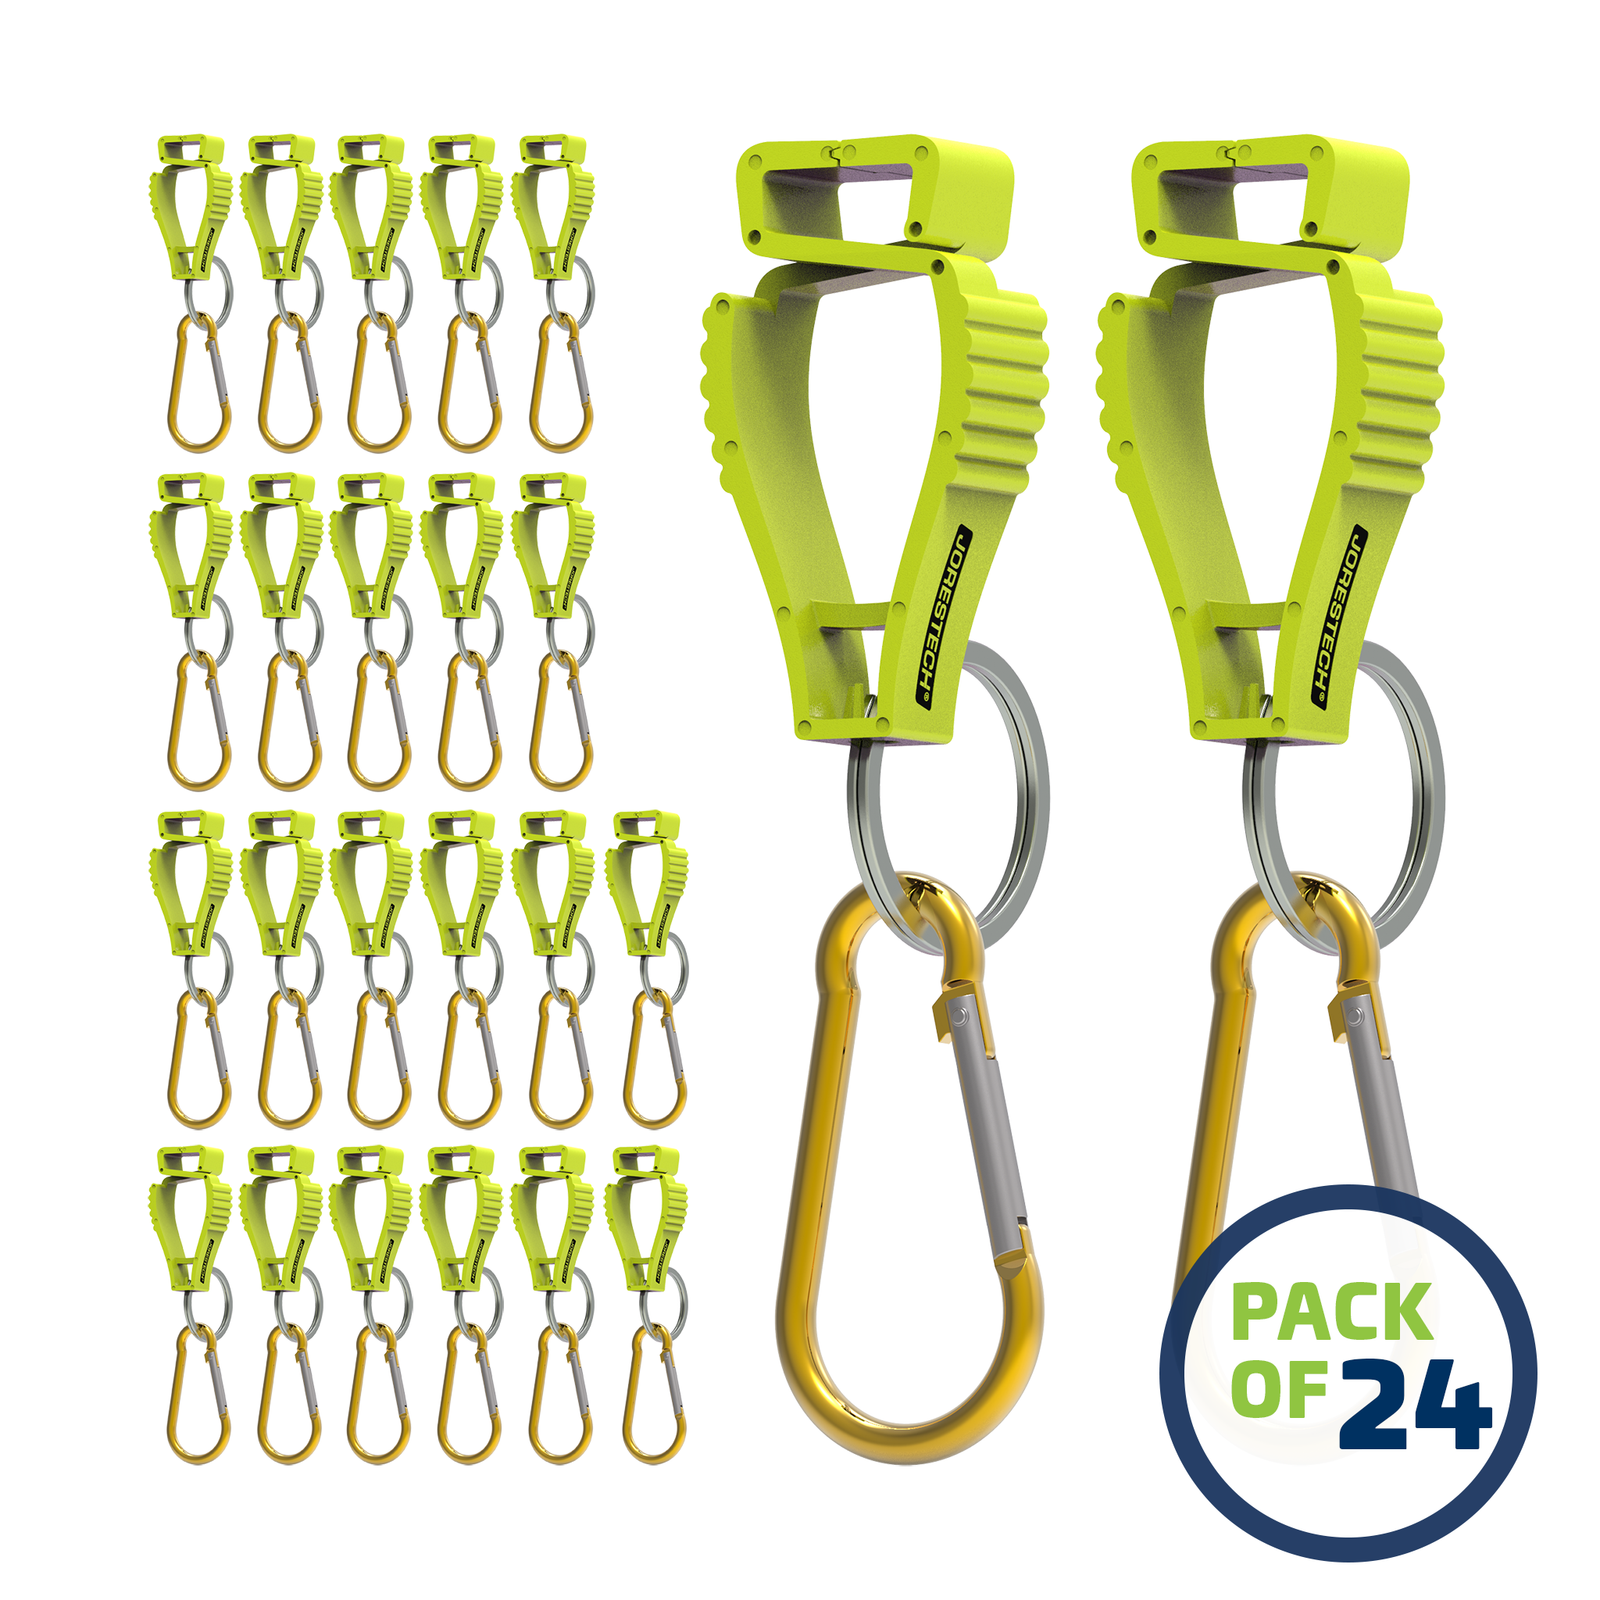 Pack of 24 Lime JORESTECH glove clip safety holders with carabiner 